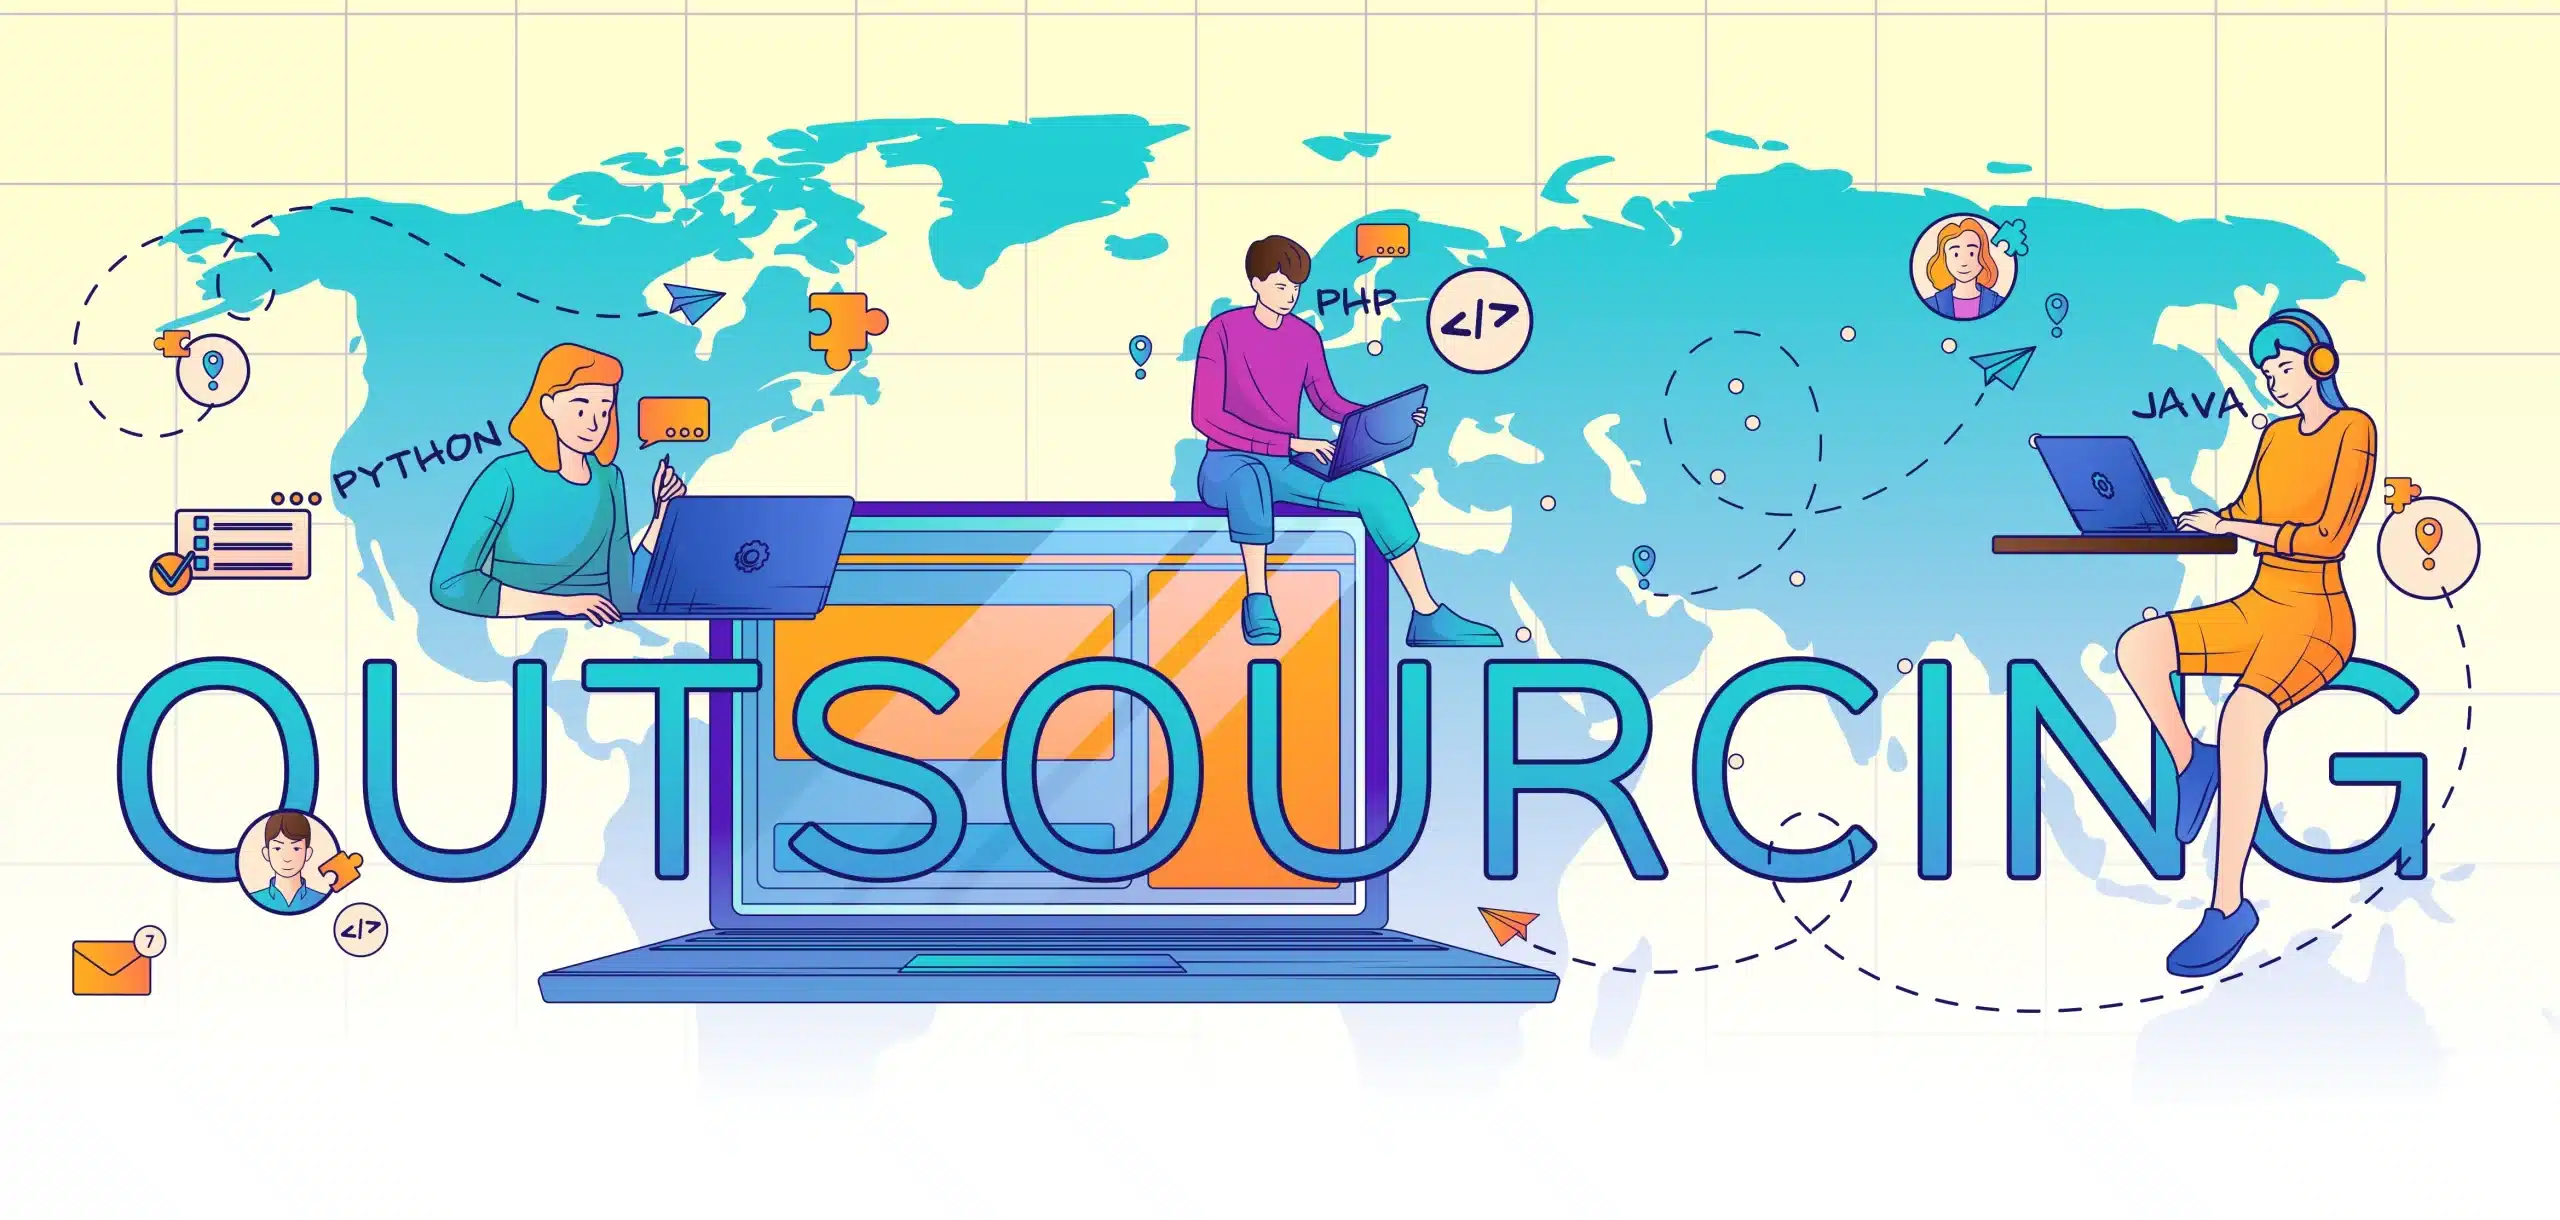 Outsourcing full stack developers